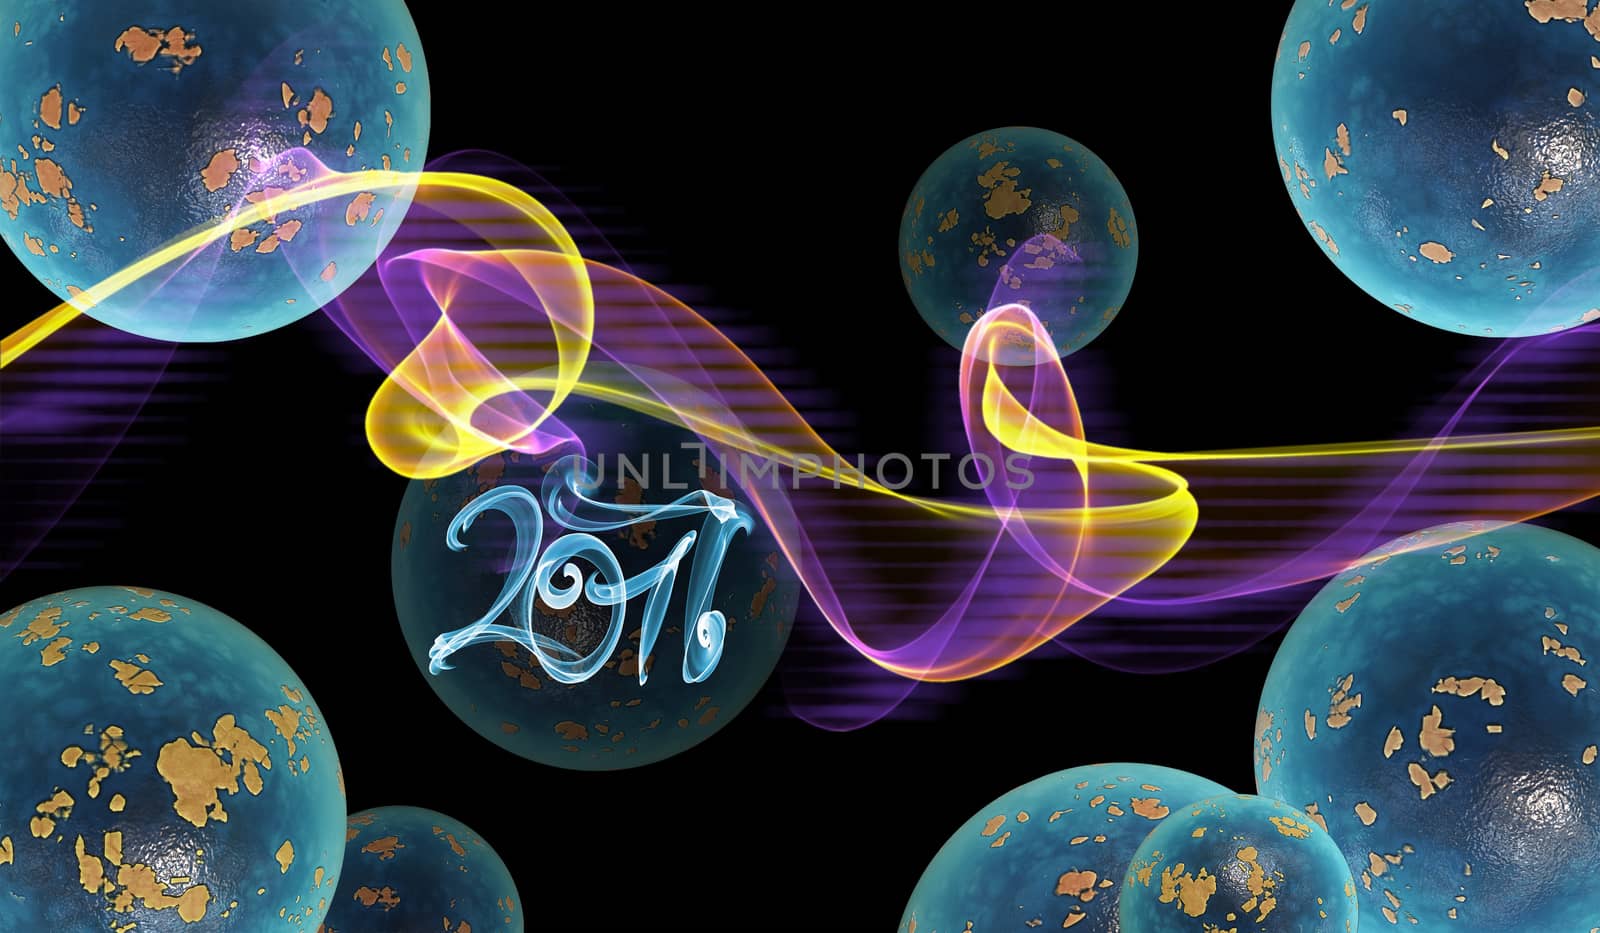 abstract colorful wavy smoke flame over black background full of planets and 2017 lettering written by blue smoke.